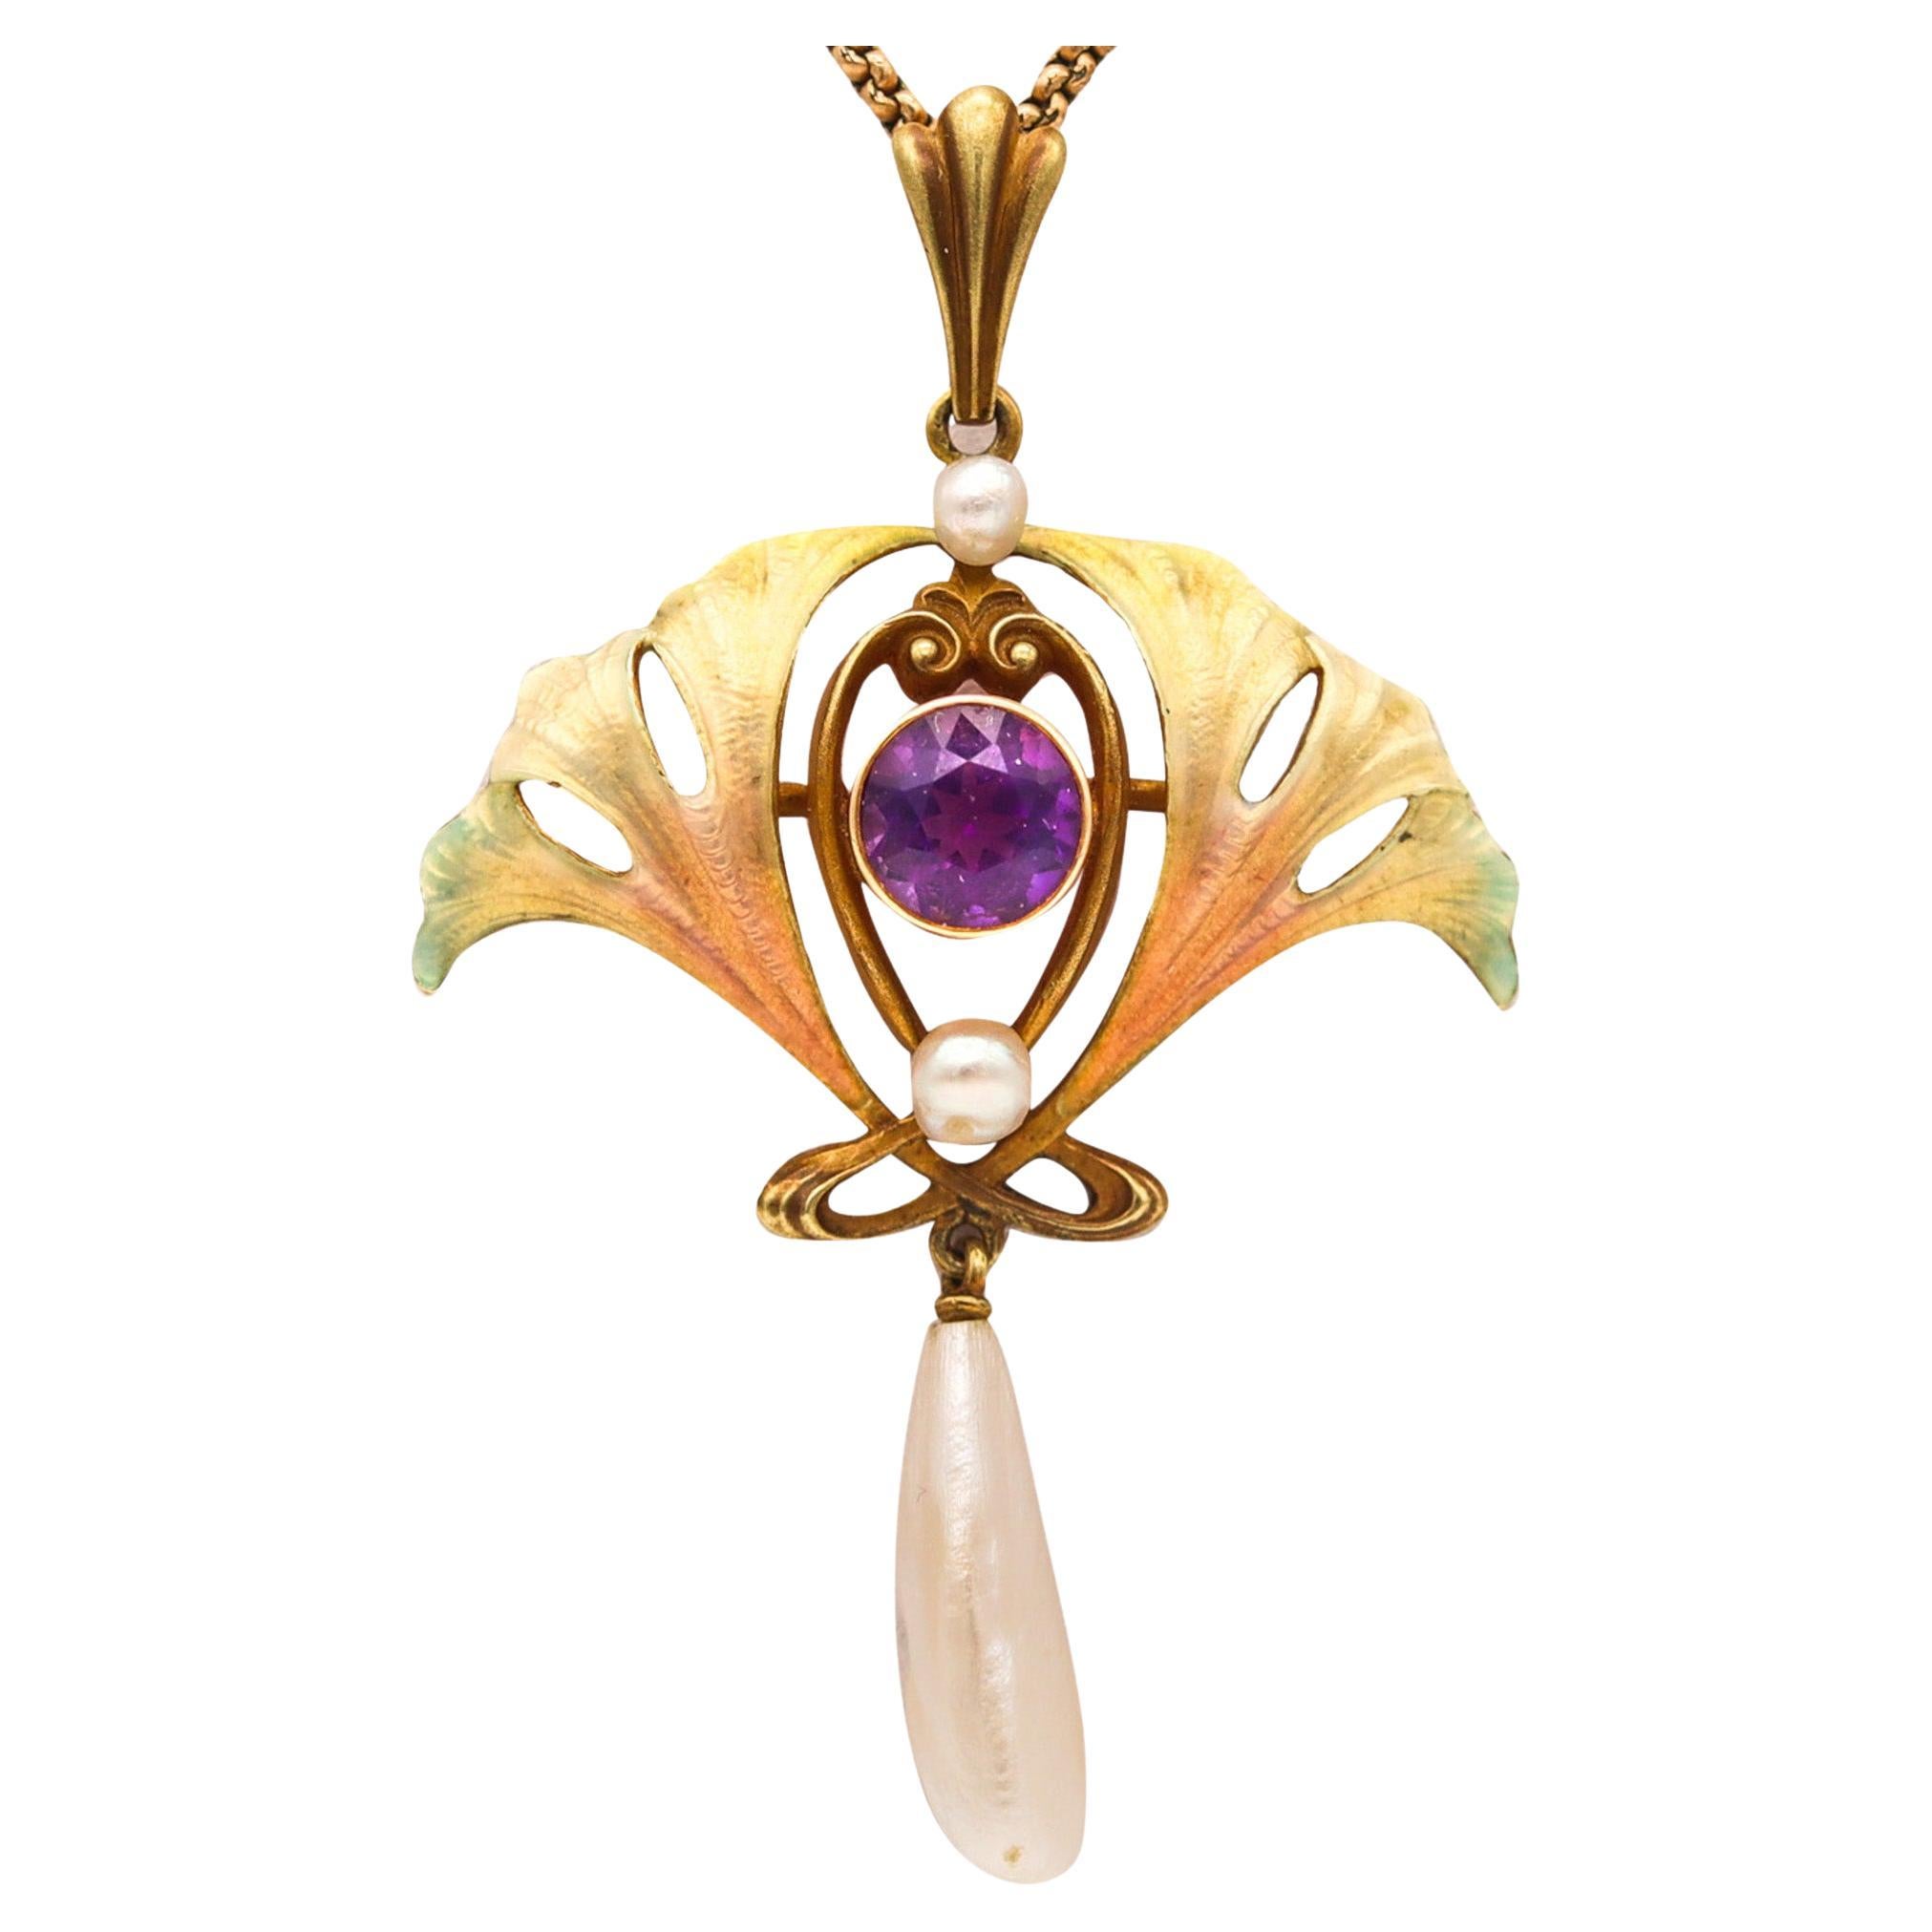 Henry Blank & Co. 1900 Art Nouveau Enameled Necklace In 14Kt Gold With Pearls For Sale